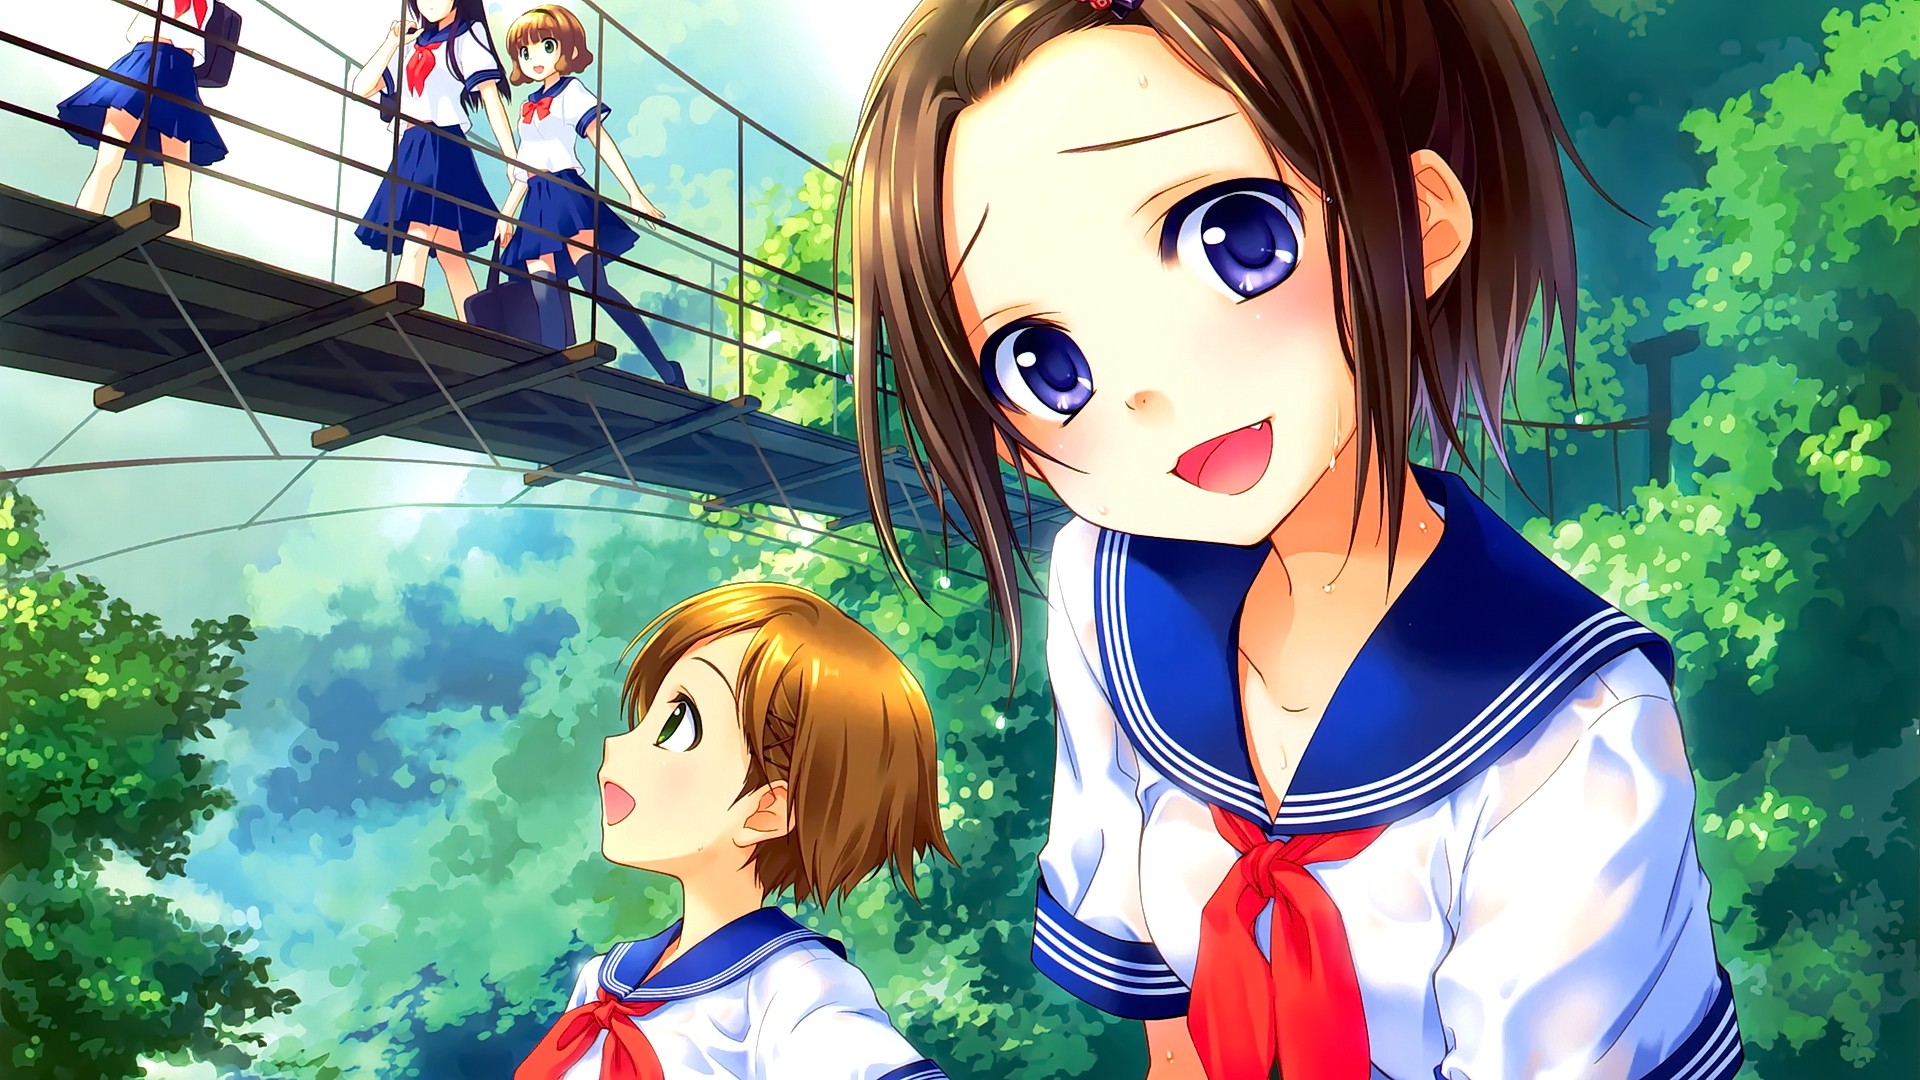 Anime 1920x1080 anime anime girls brunette blue eyes short hair school uniform open mouth smiling looking away looking at viewer forest bridge original characters group of women women outdoors